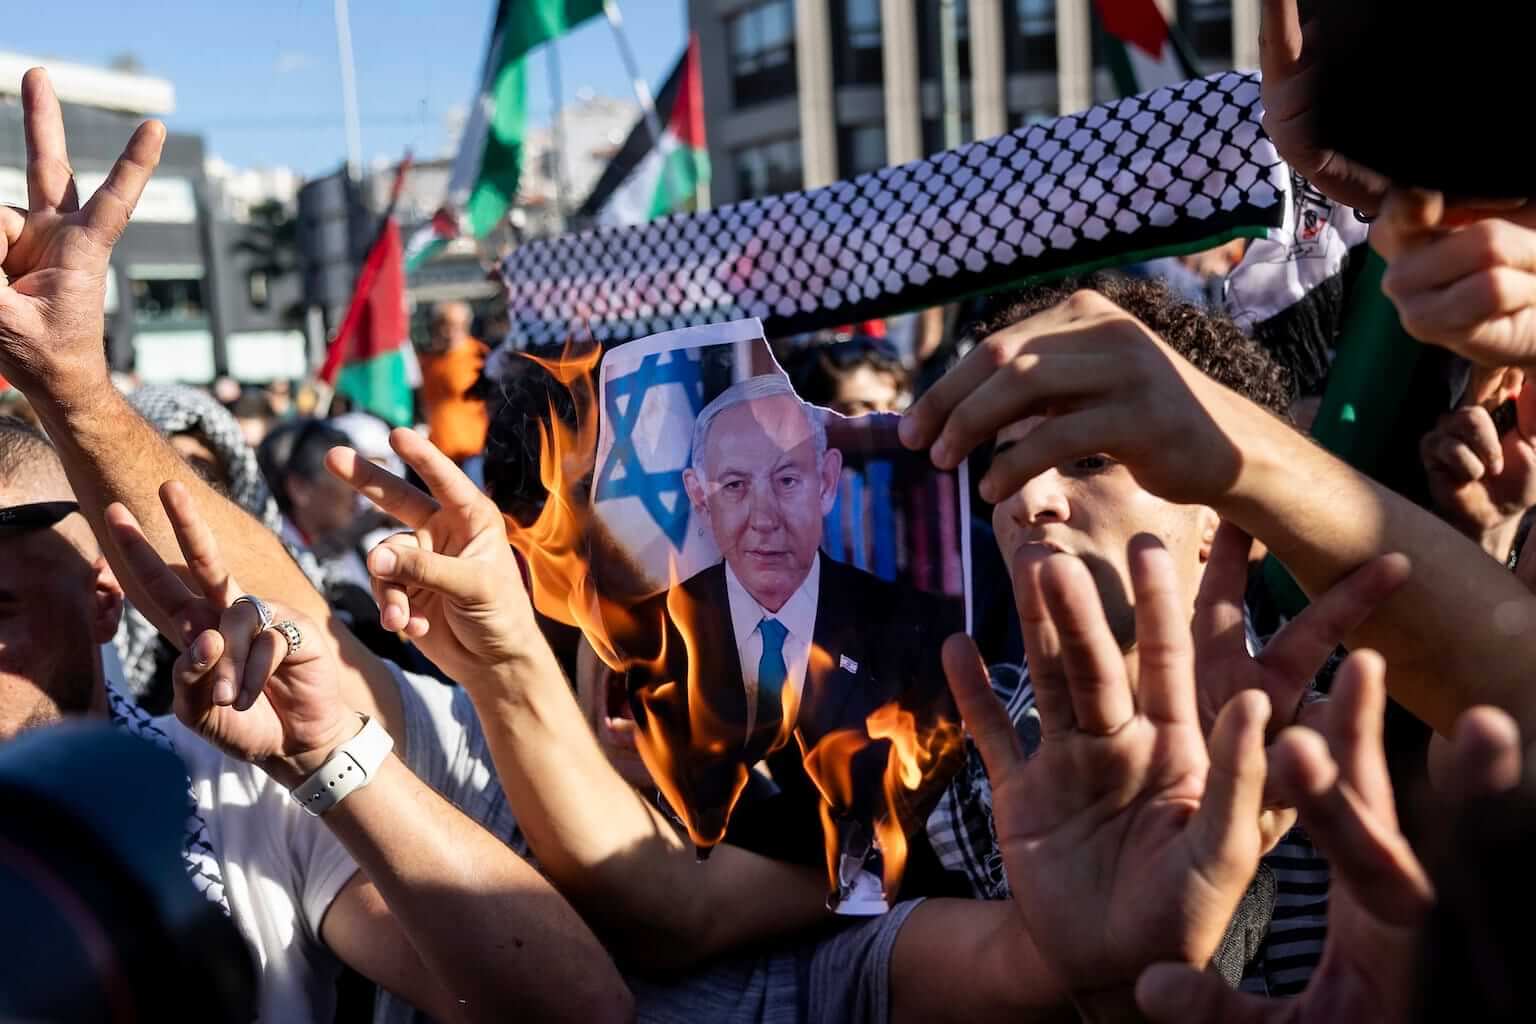 Pro-Palestinian protesters burn a photograph of Israeli Prime Minister Benjamin Netanyahu during a rally to express solidarity with Palestinians, in front of the Israeli embassy, in Athens, Greece, Sunday, Nov. 5, 2023. (AP Photo/Yorgos Karahalis). As antisemitism rises and Palestinians in Gaza suffer, we're led to a rational question: Why does God allow suffering?